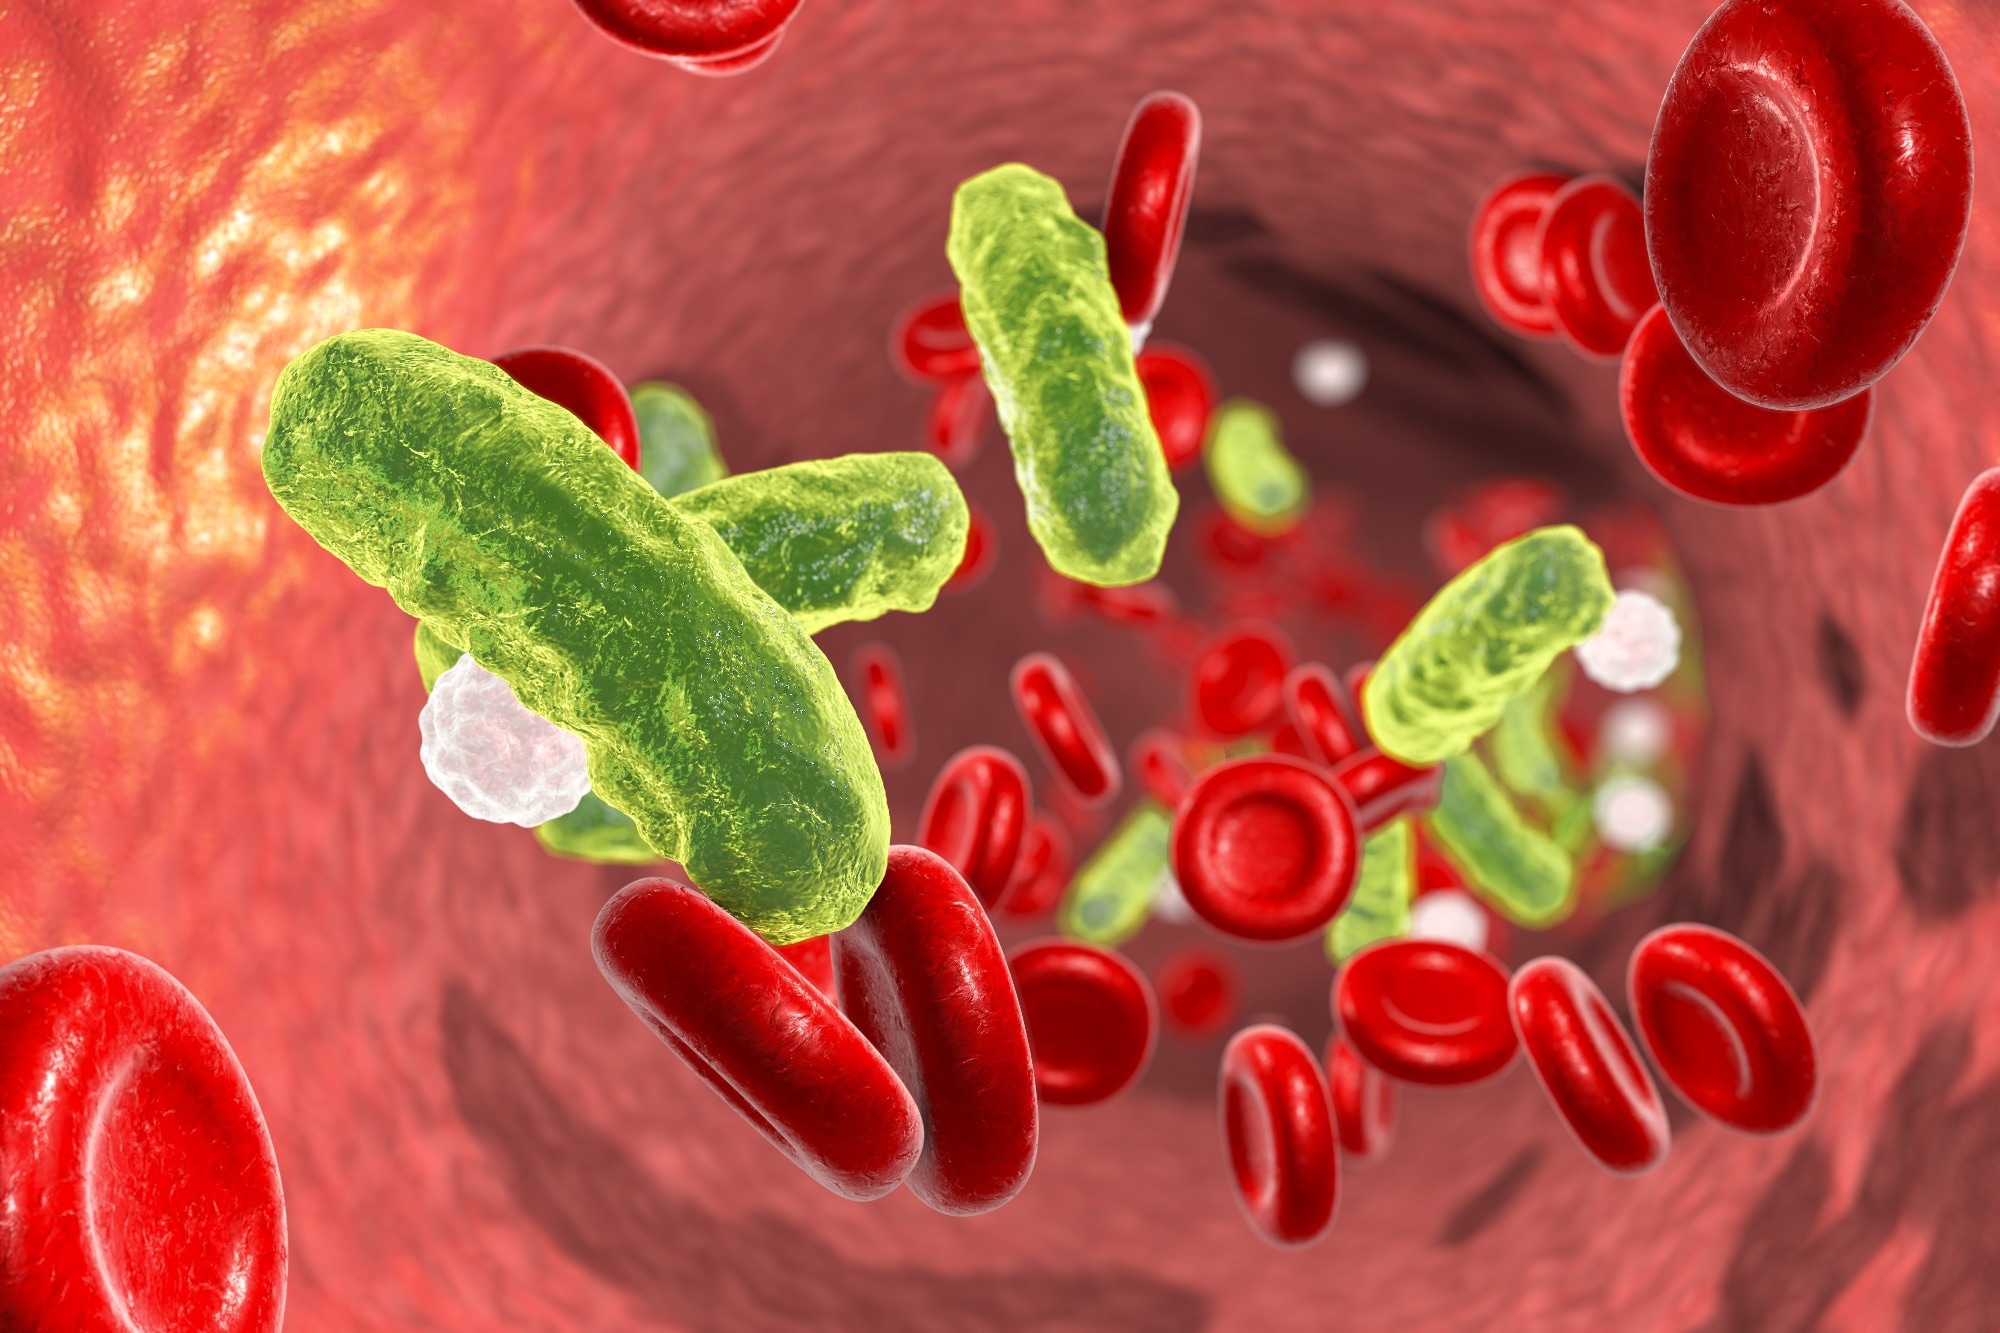 Study: Clinical and health inequality risk factors for non-COVID-related sepsis during the global COVID-19 pandemic: a national case-control and cohort study. Image Credit: Kateryna Kon/Shutterstock.com